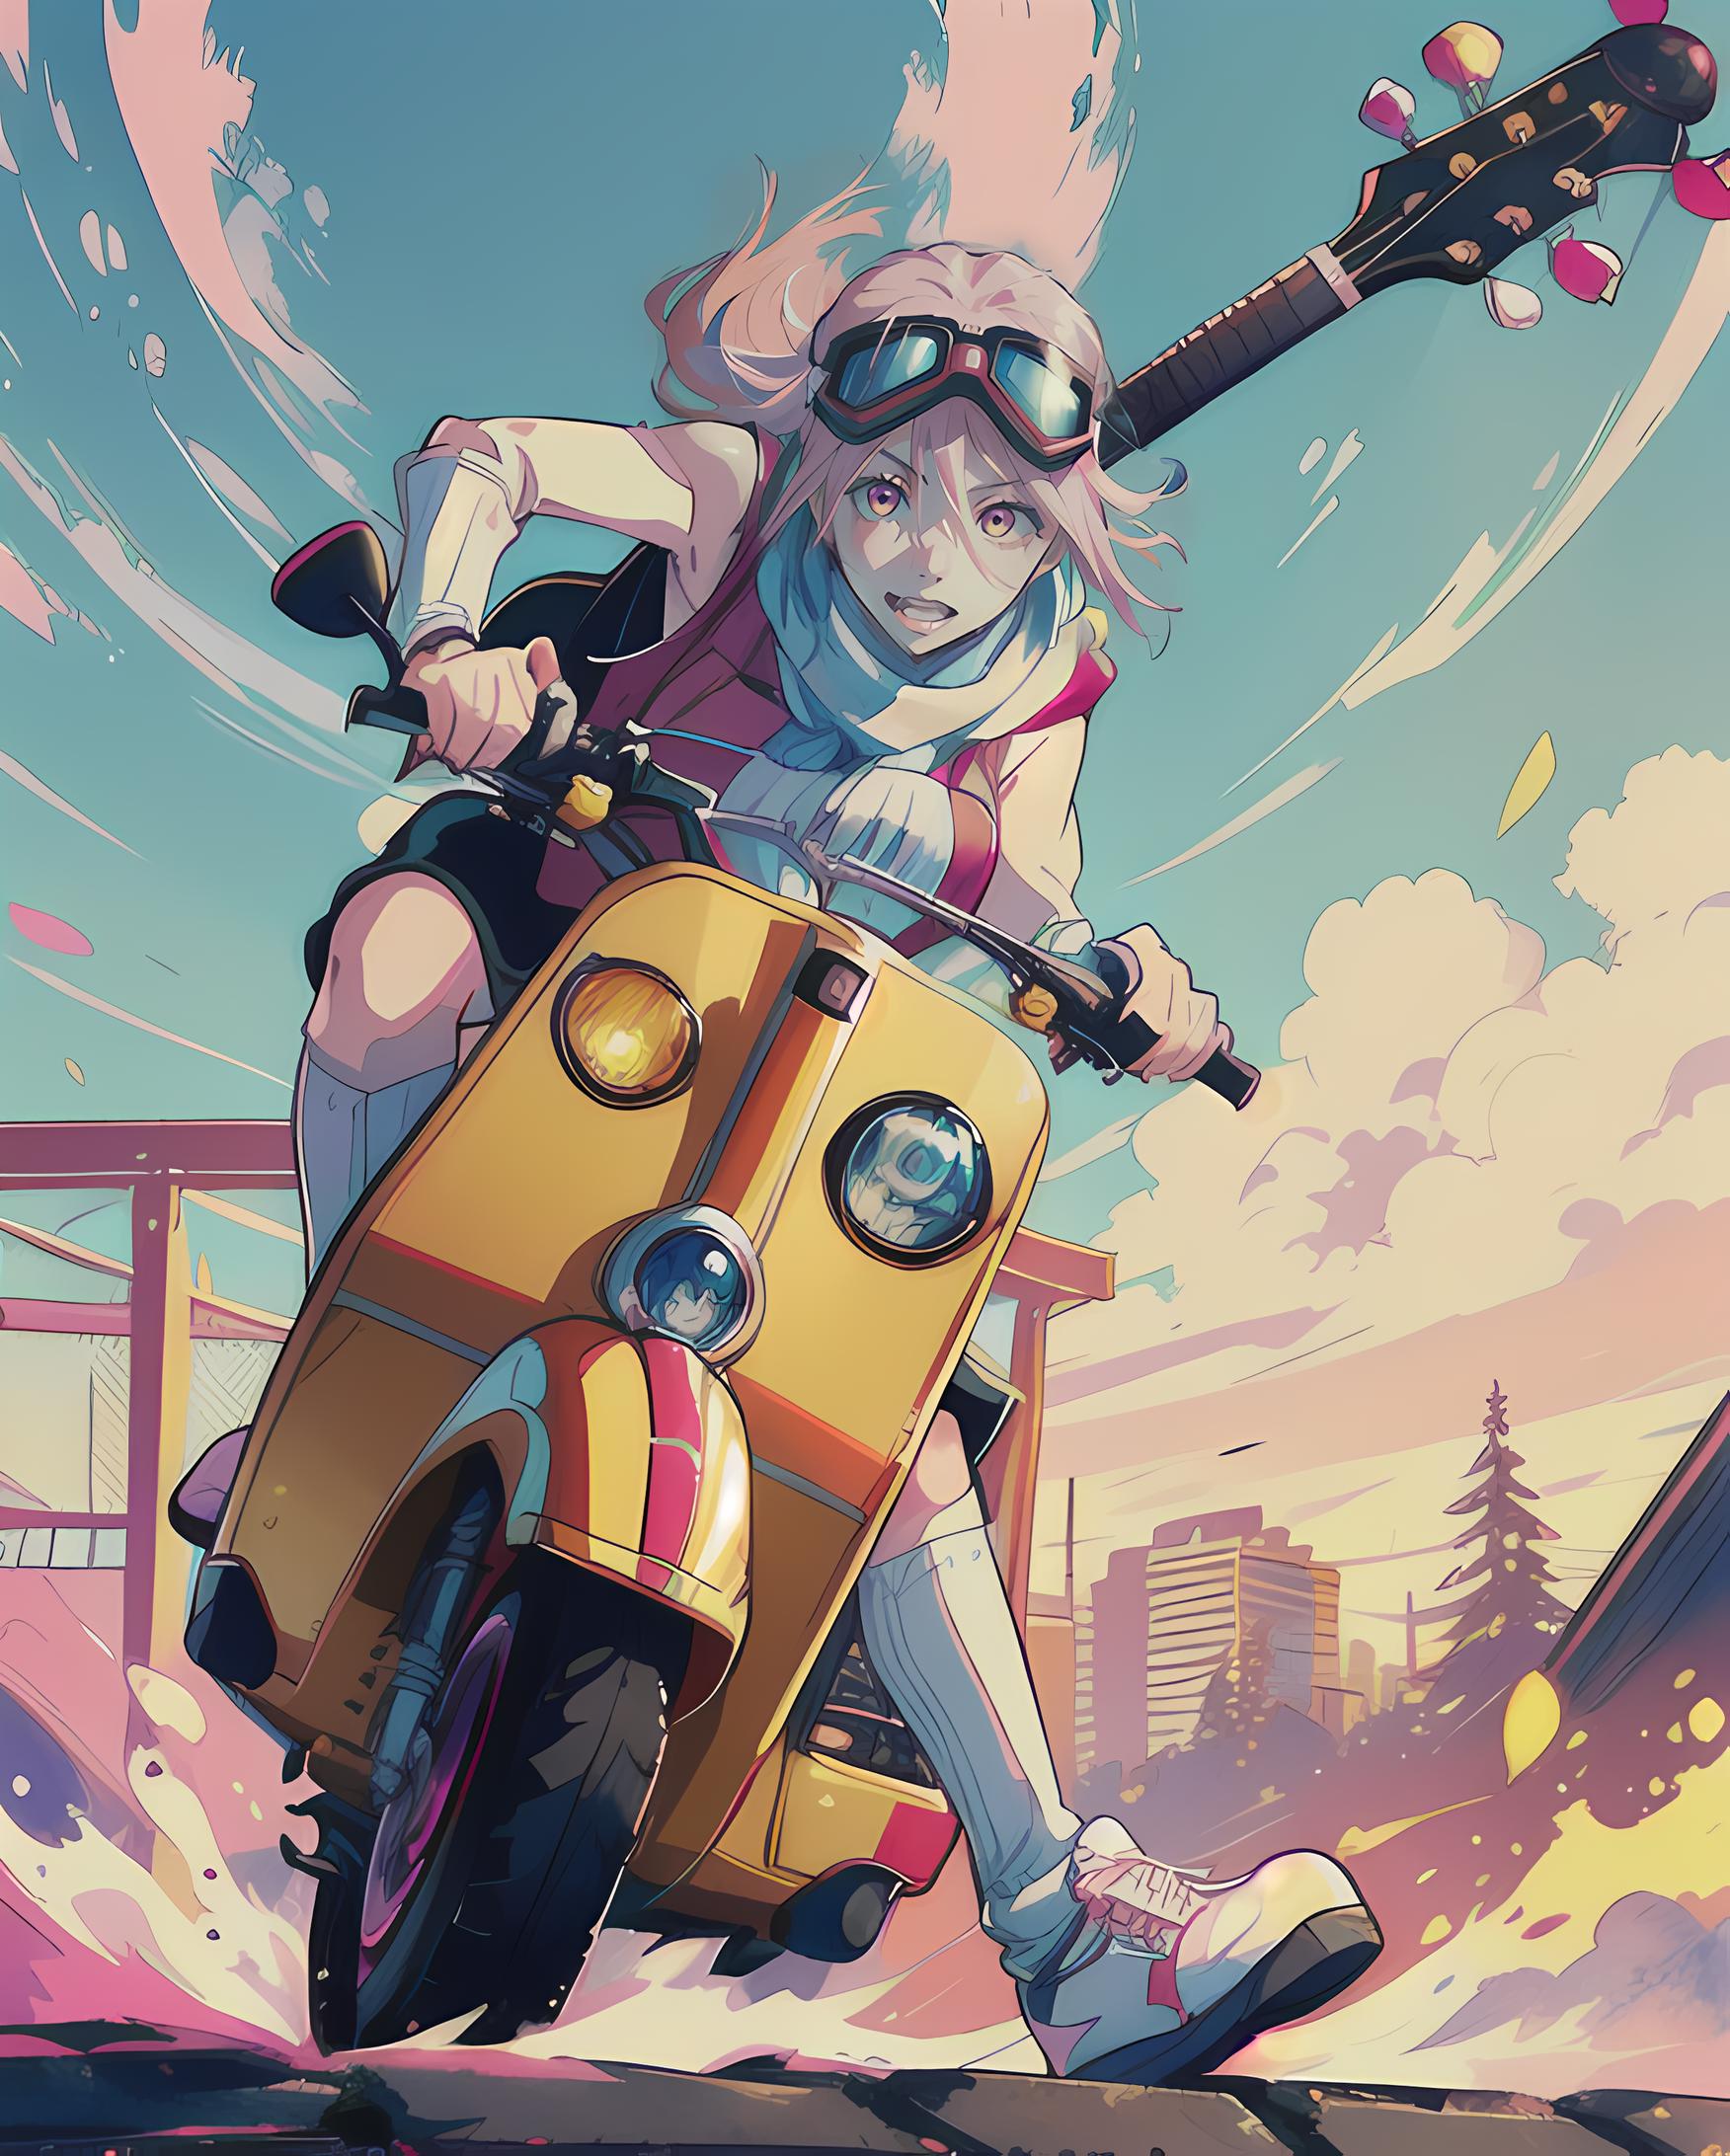 "Anime-style woman riding a motorcycle with a guitar on her back".